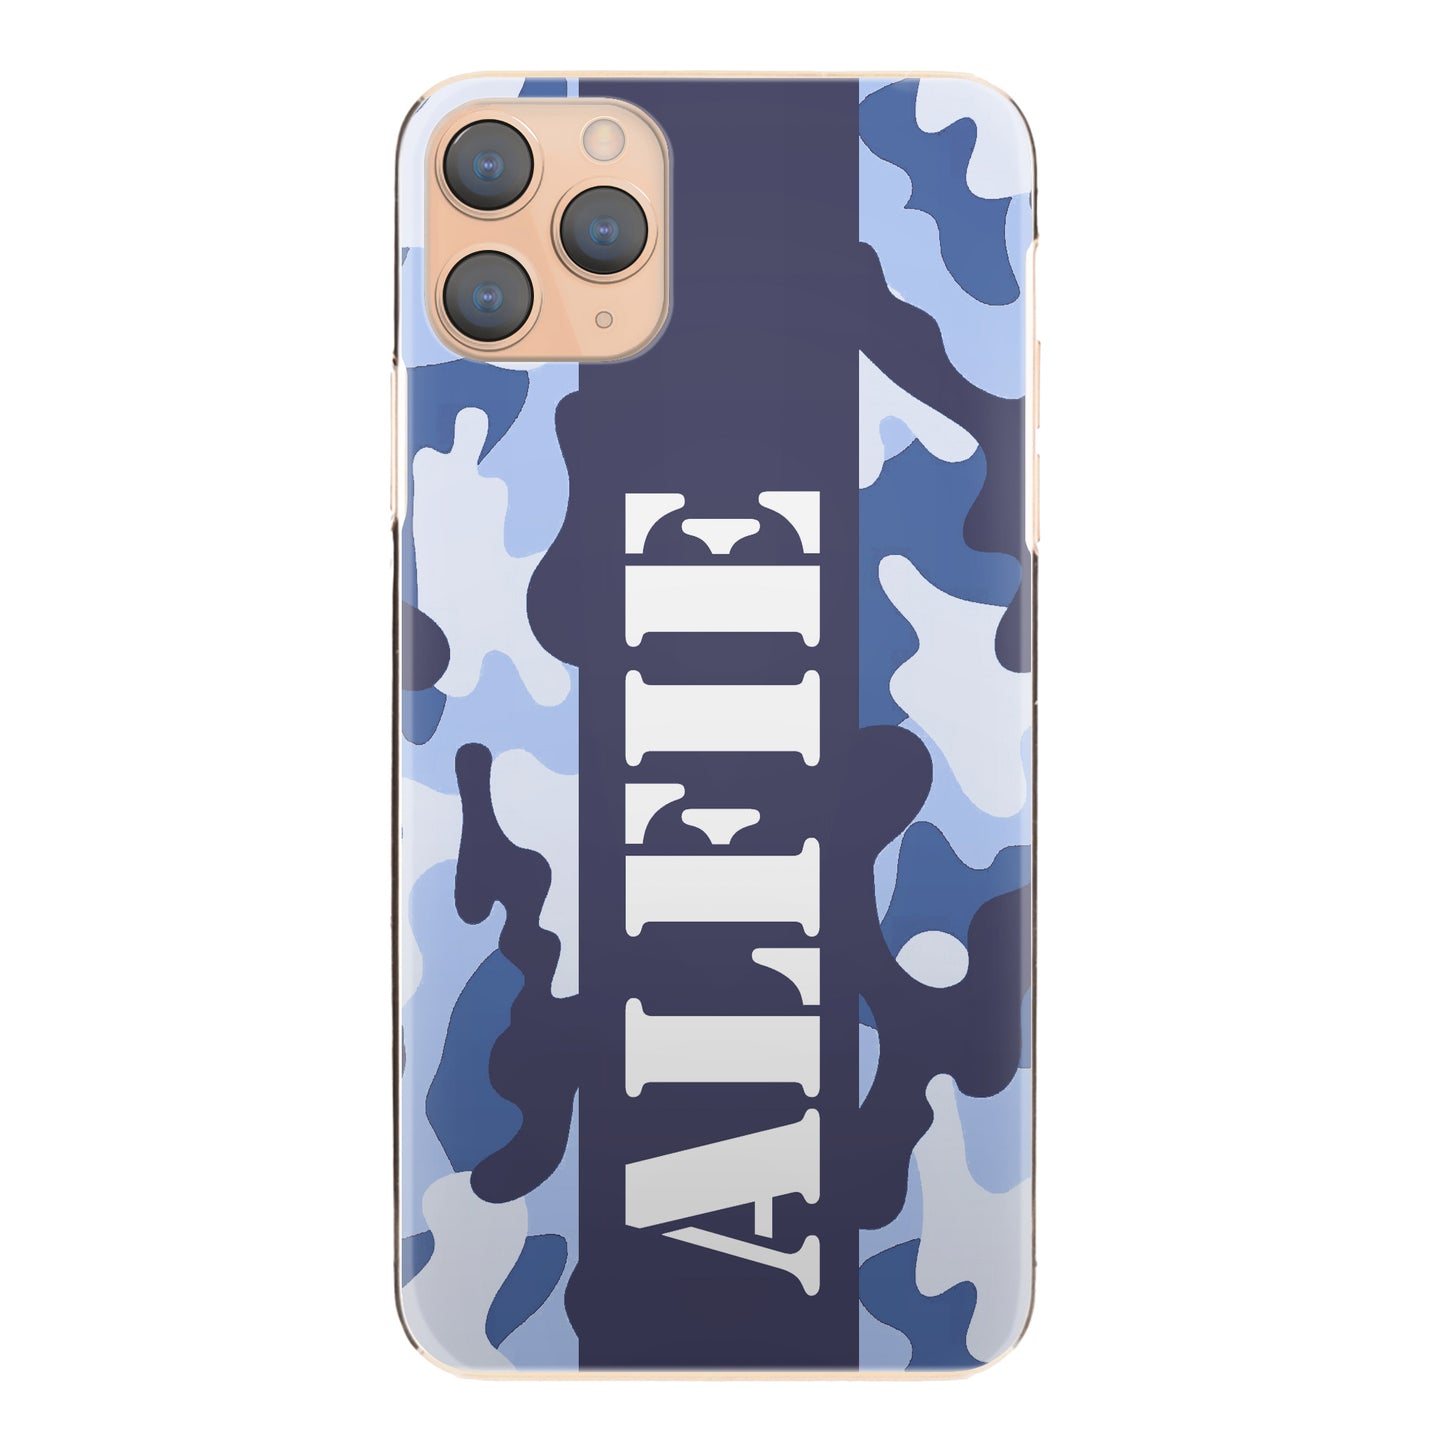 Personalised Samsung Galaxy Phone Hard Case with Military Text on Blue Camo